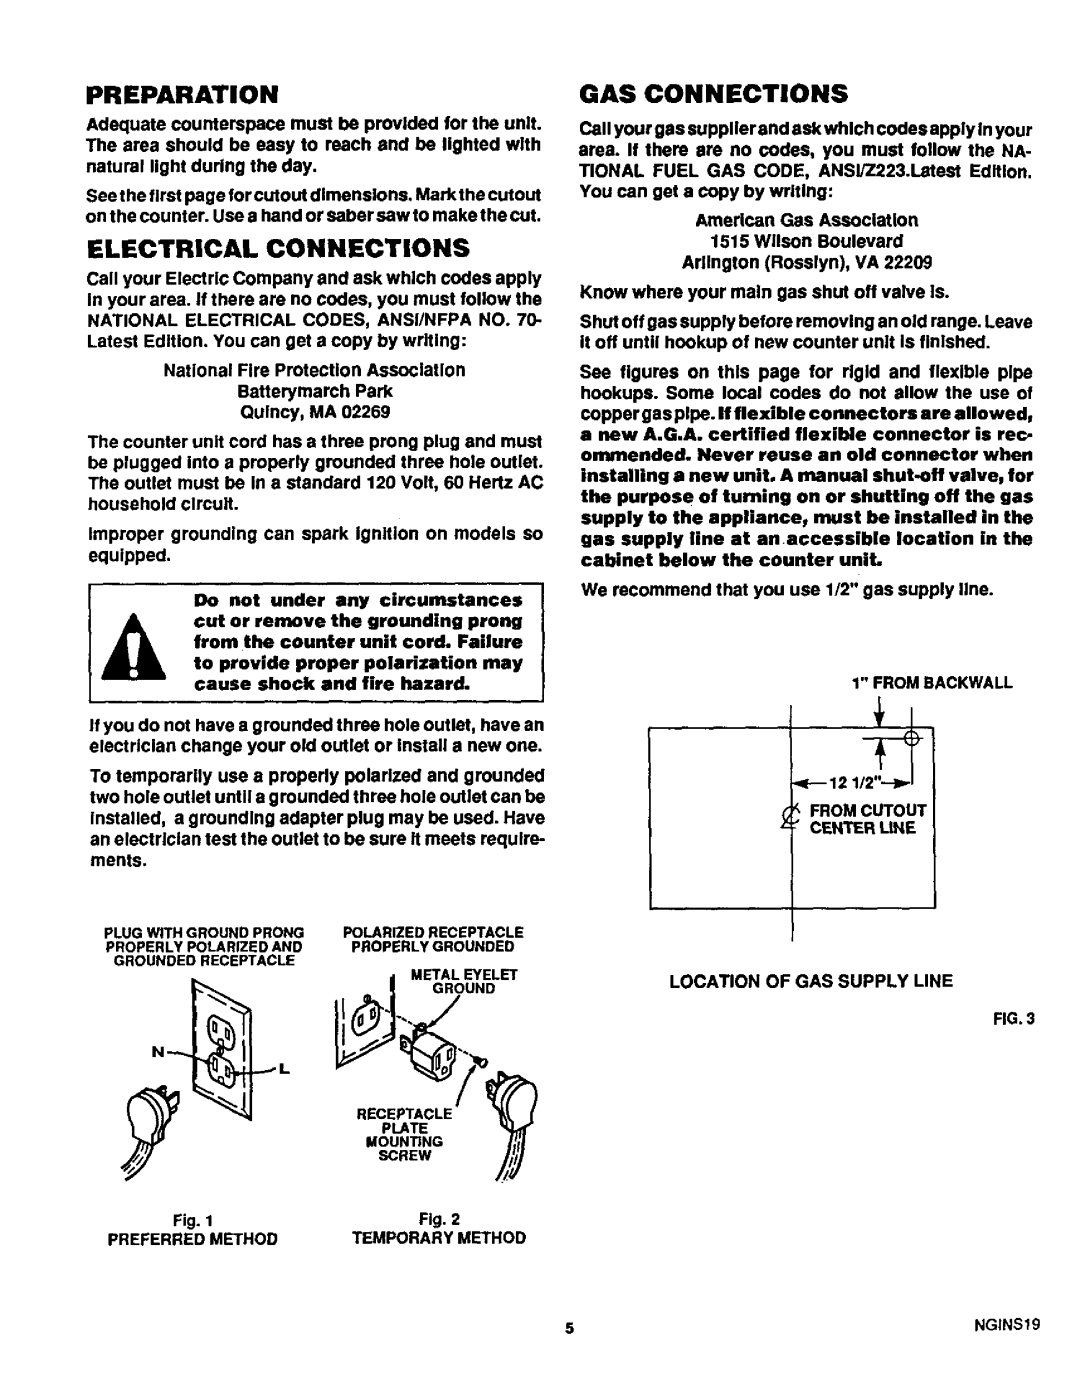 Sears 32O2O, 32O21, 32025 warranty Preparation, Electrical Connections, Gas Connections, _ Fromcutout 